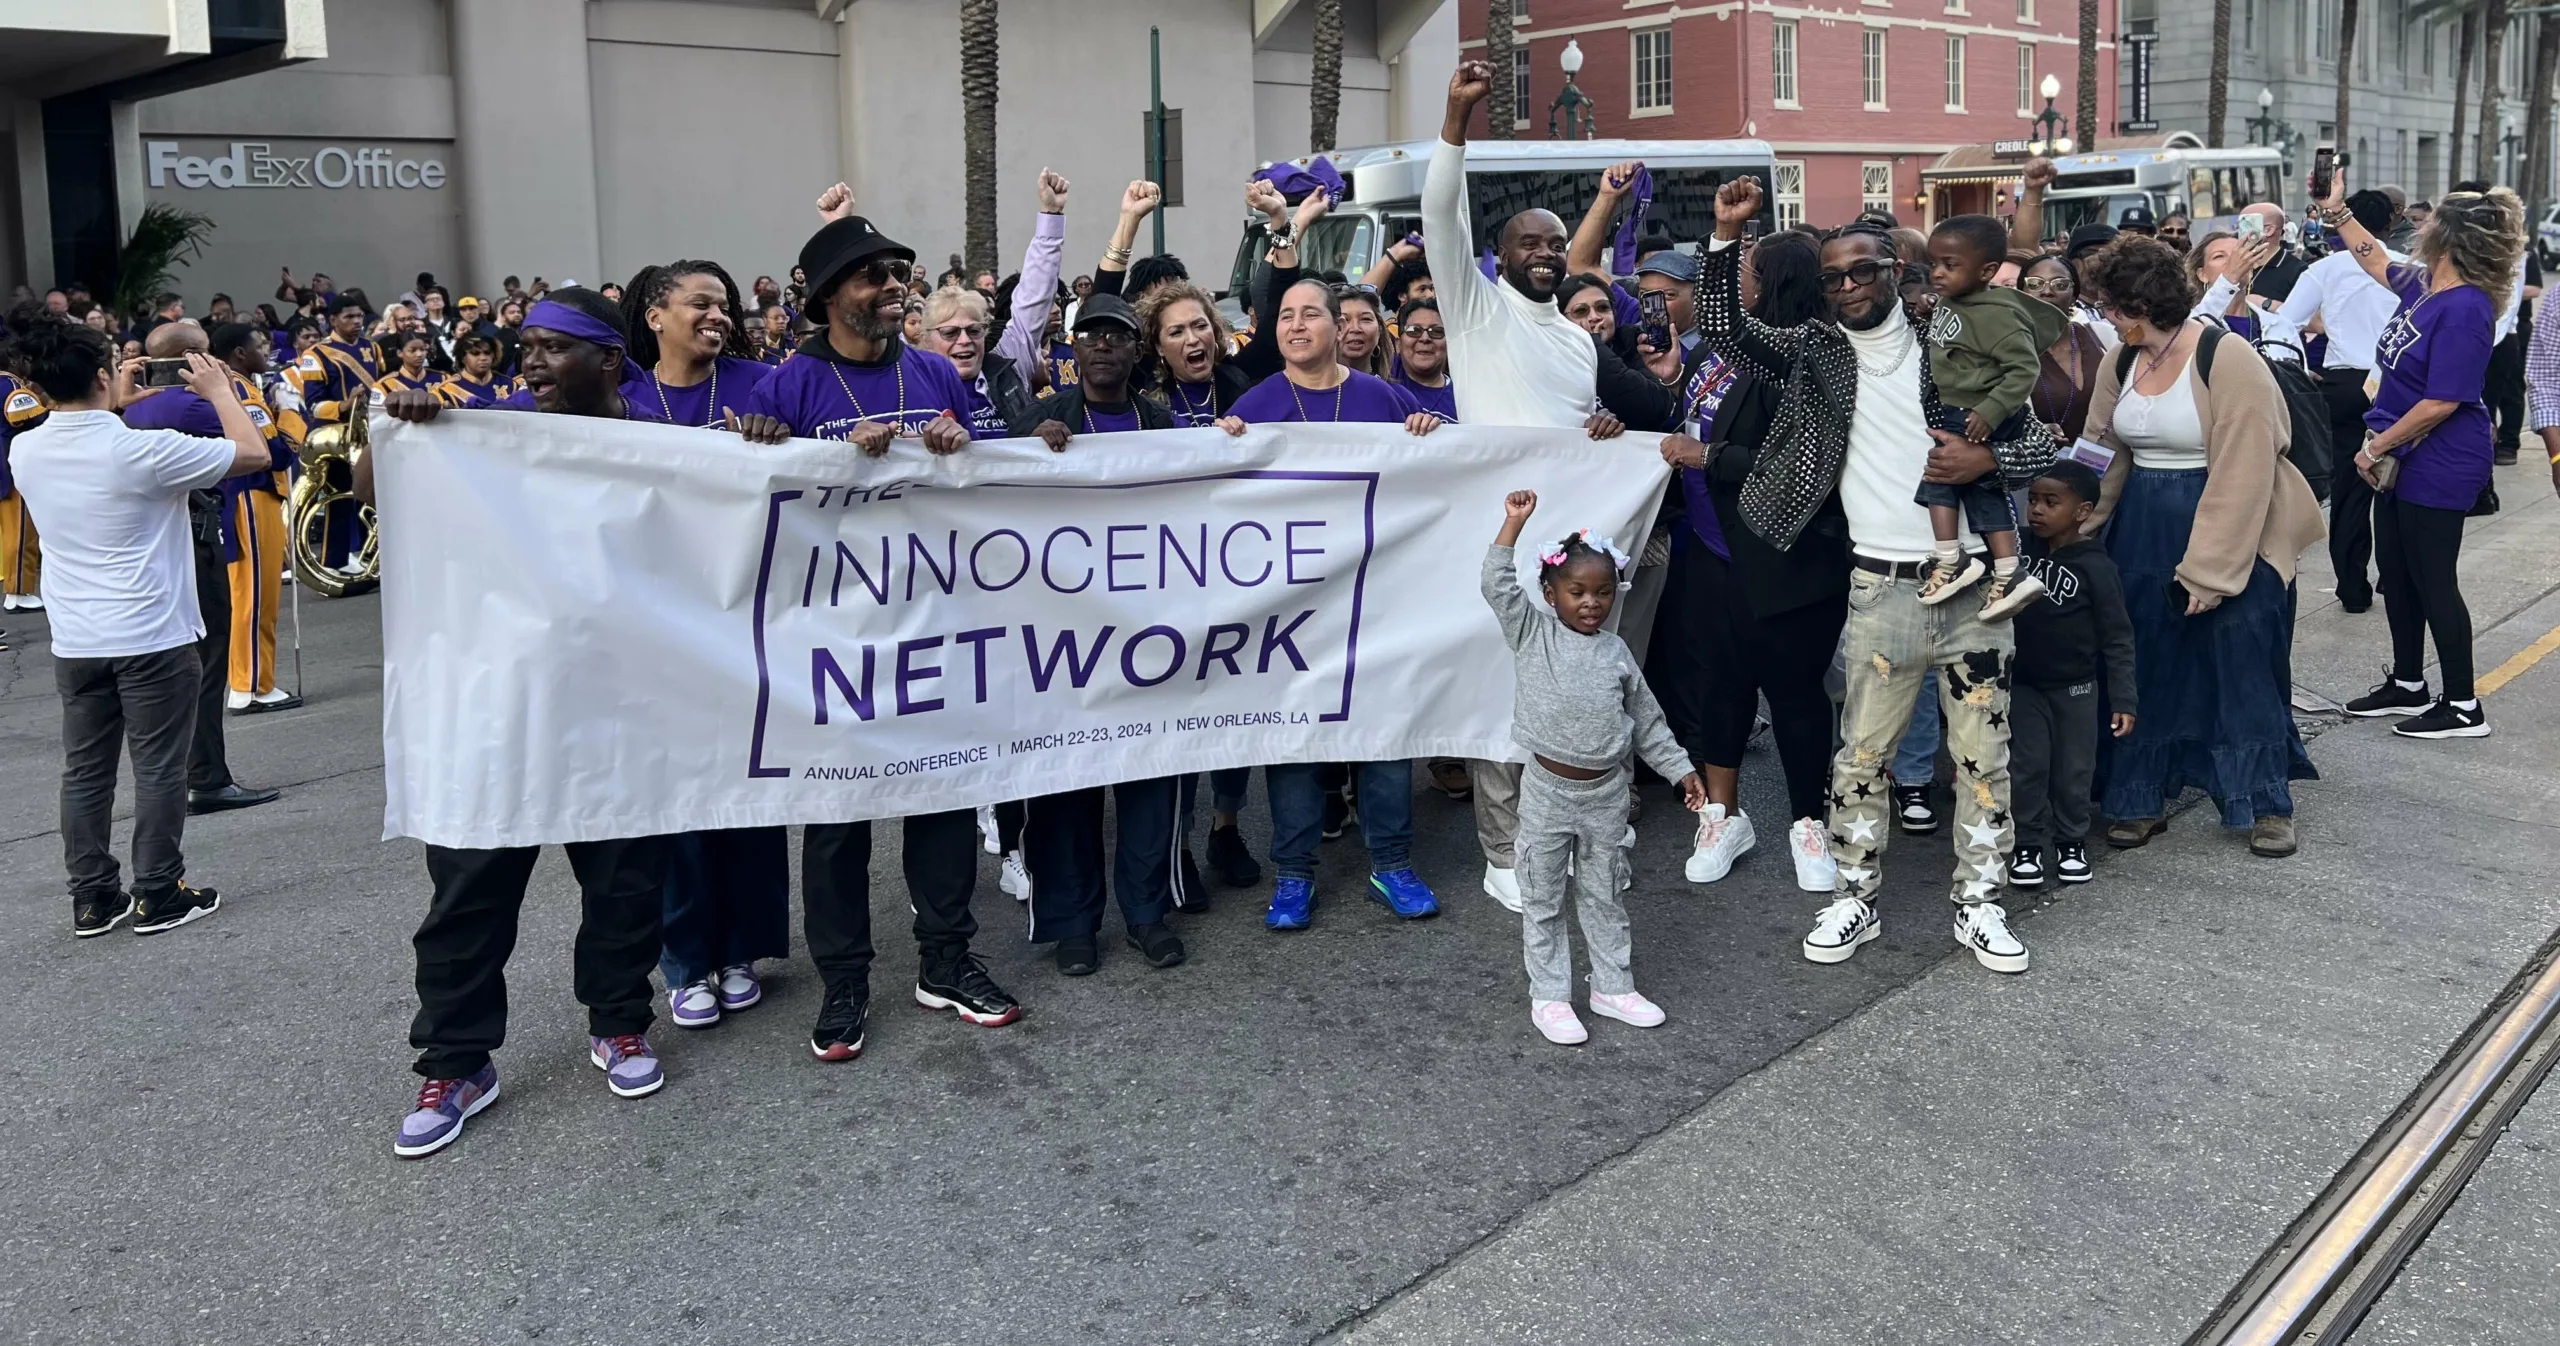 Innocence Network Conference leaders including Rodney Roberts, Termaine Hicks, Anna Vasquez, Robert Jones, and Jerome Morgan at the Freedom Parade in New Orleans. (Image: Alicia Maule/Innocence Project)